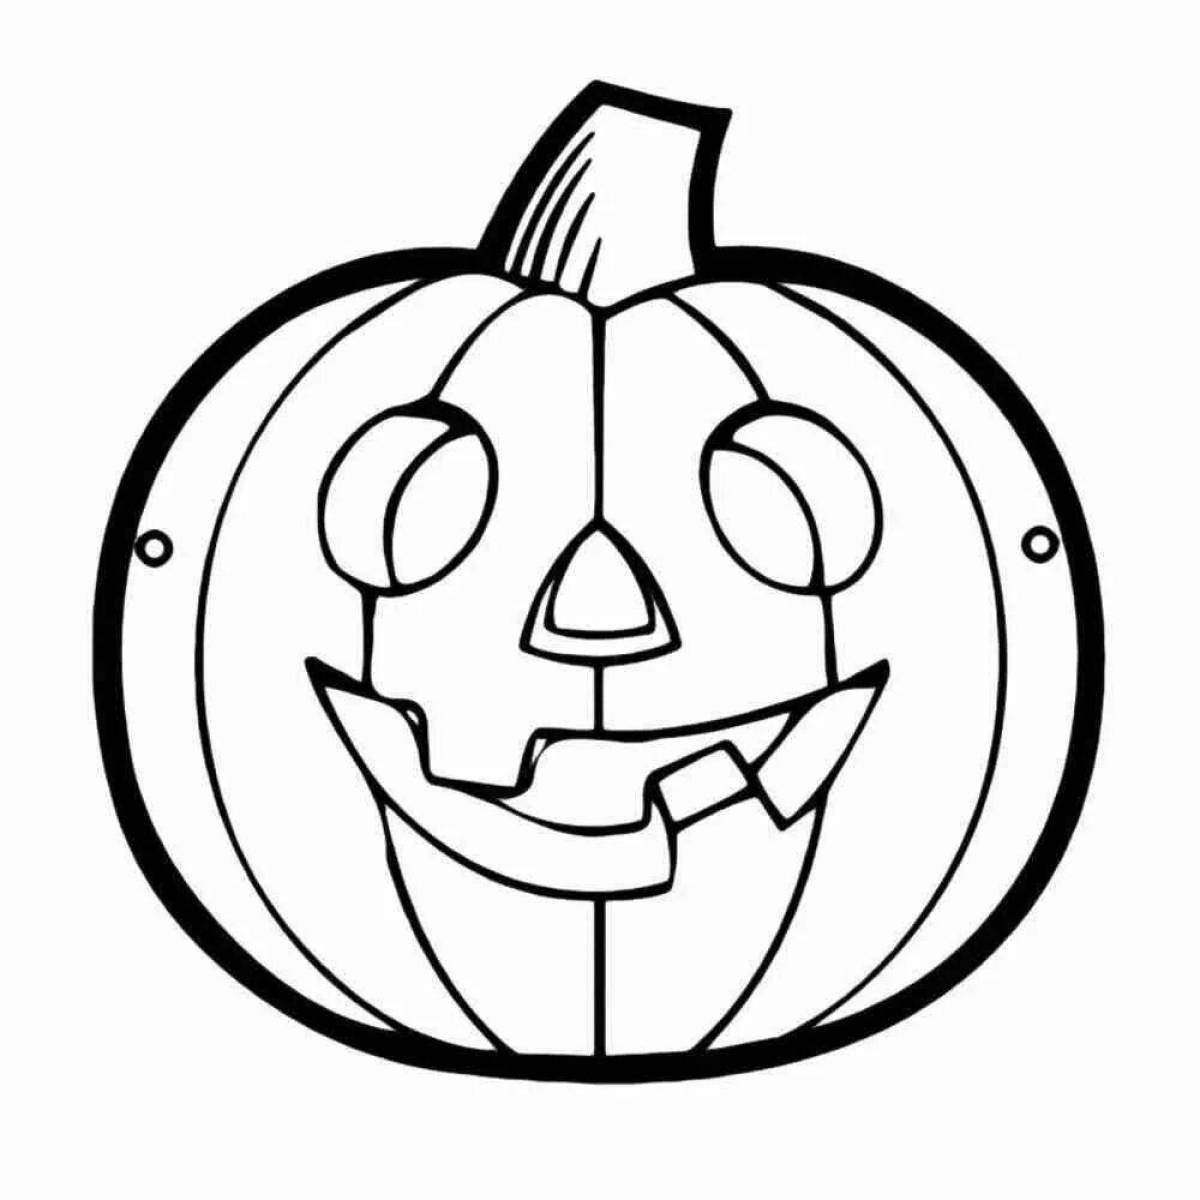 Inscrutable halloween pumpkin coloring page